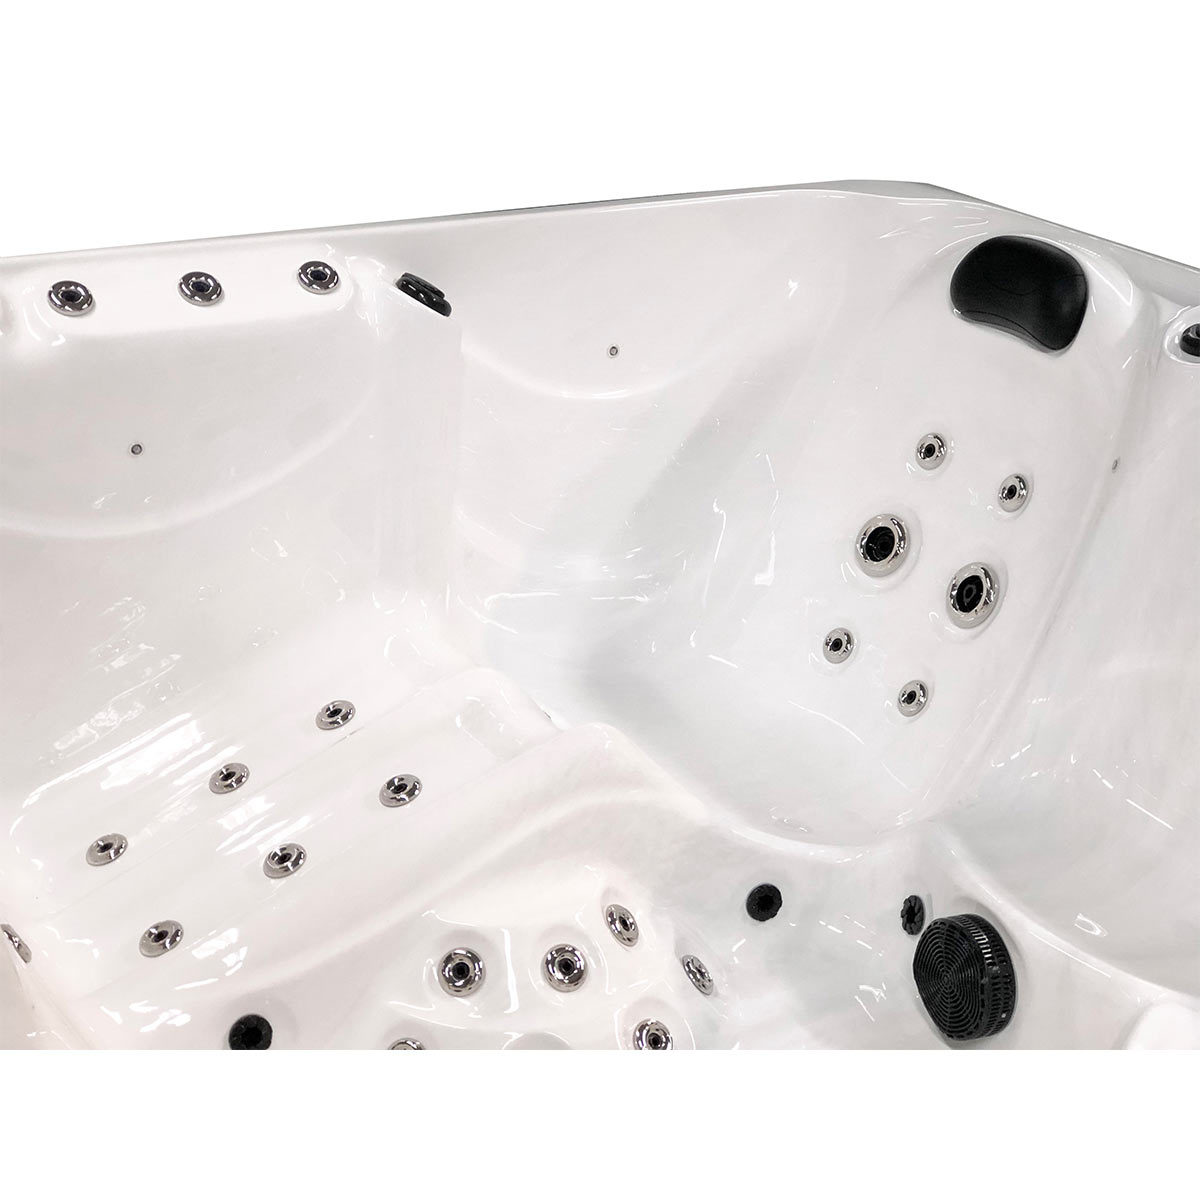 Blue Whale Spa San Carlos 51-Jet 6 Person Hot Tub - Delivered and Installed